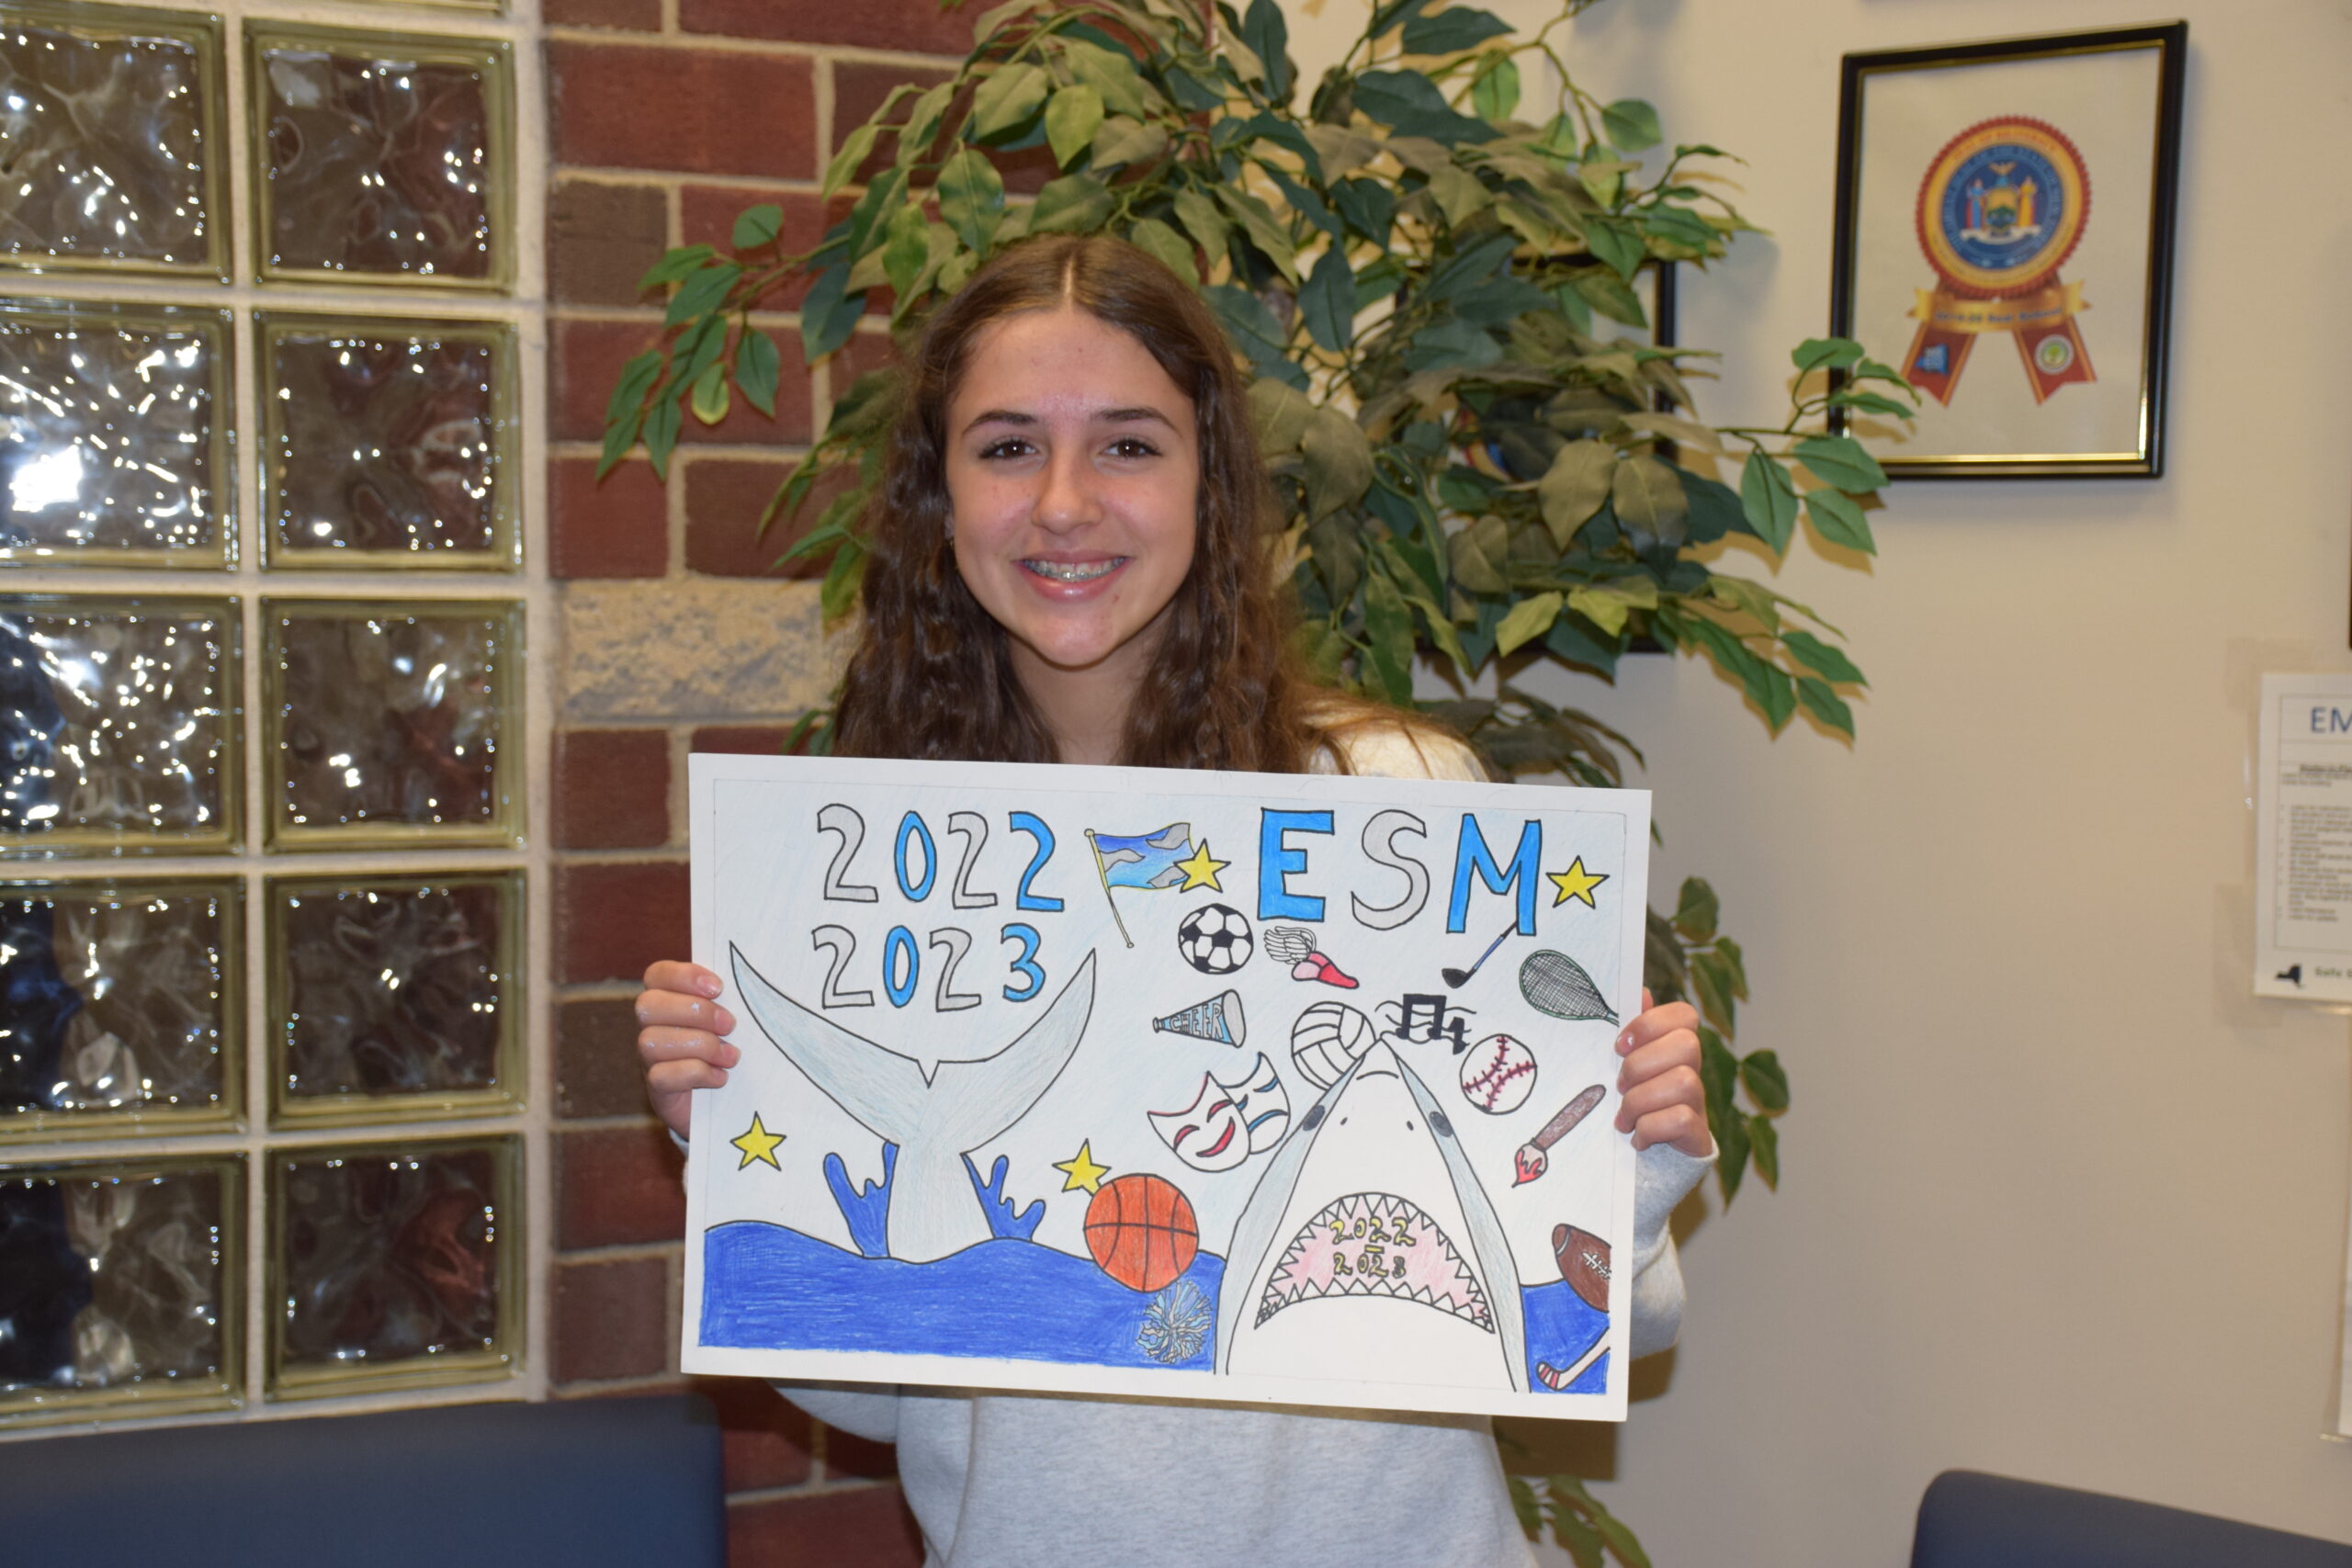 The artwork of Eastport-South Manor Jr.-Sr. High School student Emily Tracy was
chosen for the cover of the 2022-23 yearbook. Tracy’s design was one of more than 100 photos or designs submitted and was chosen by the members of the Junior High Yearbook Club.
Her design depicts various symbols representing aspects of the junior high school’s educational and extracurricular programs. COURTESY EASTPORT-SOUTH MANOR SCHOOL DISTRICT